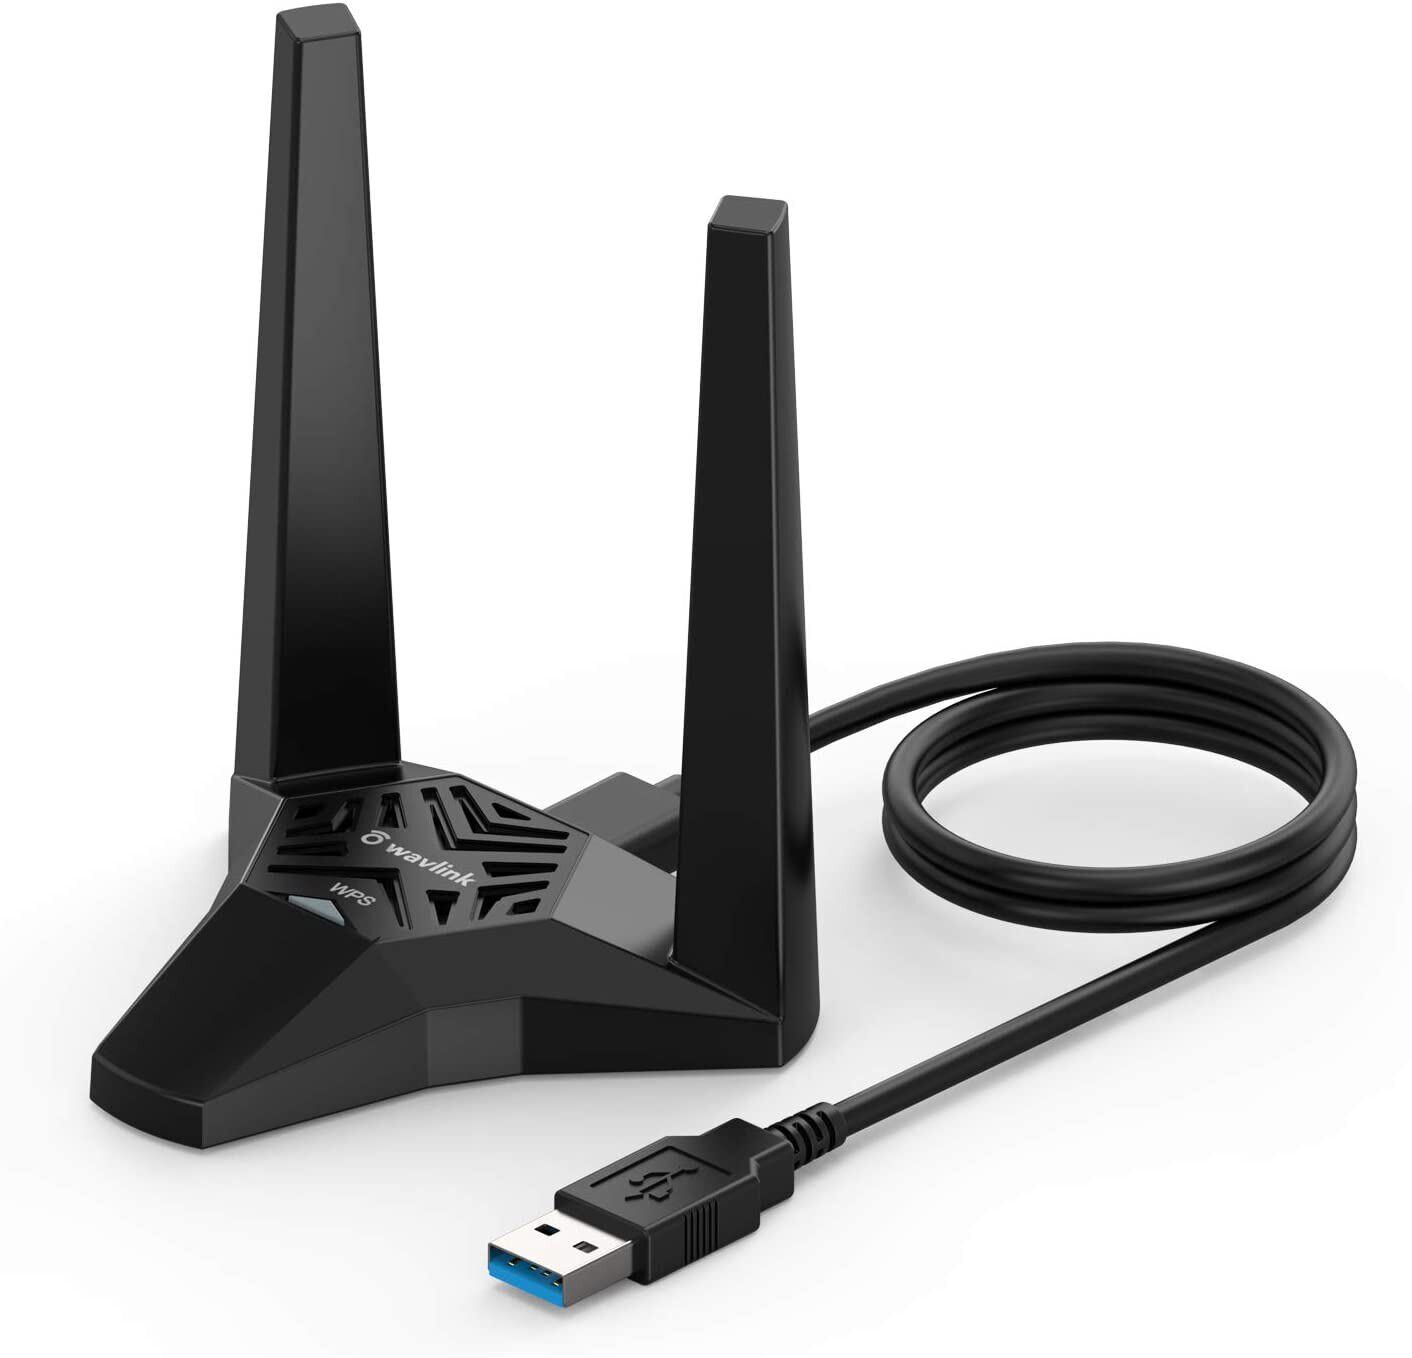 AC1300/AC1900 USB 3.0 WiFi Adapter Dual Band 2.4/5GHz Wireless Network Adapter